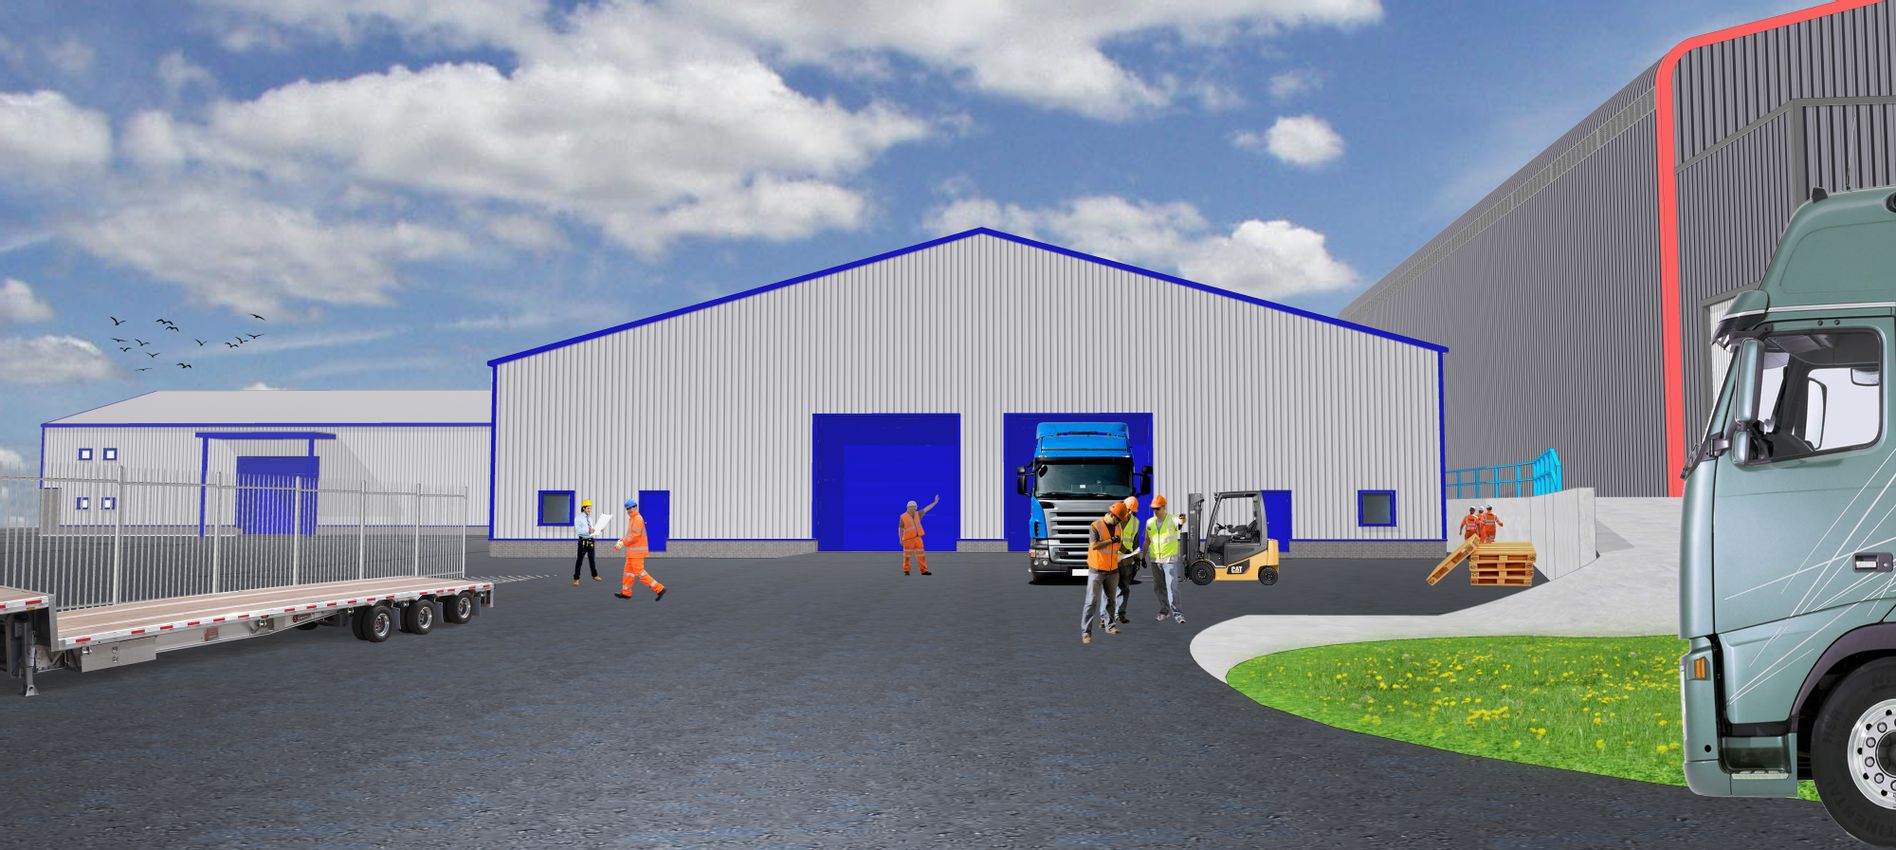 Units 1 & 2, Arkady Industrial Estate, 240 Briscoe Lane, Manchester, Greater Manchester, M40 2XG